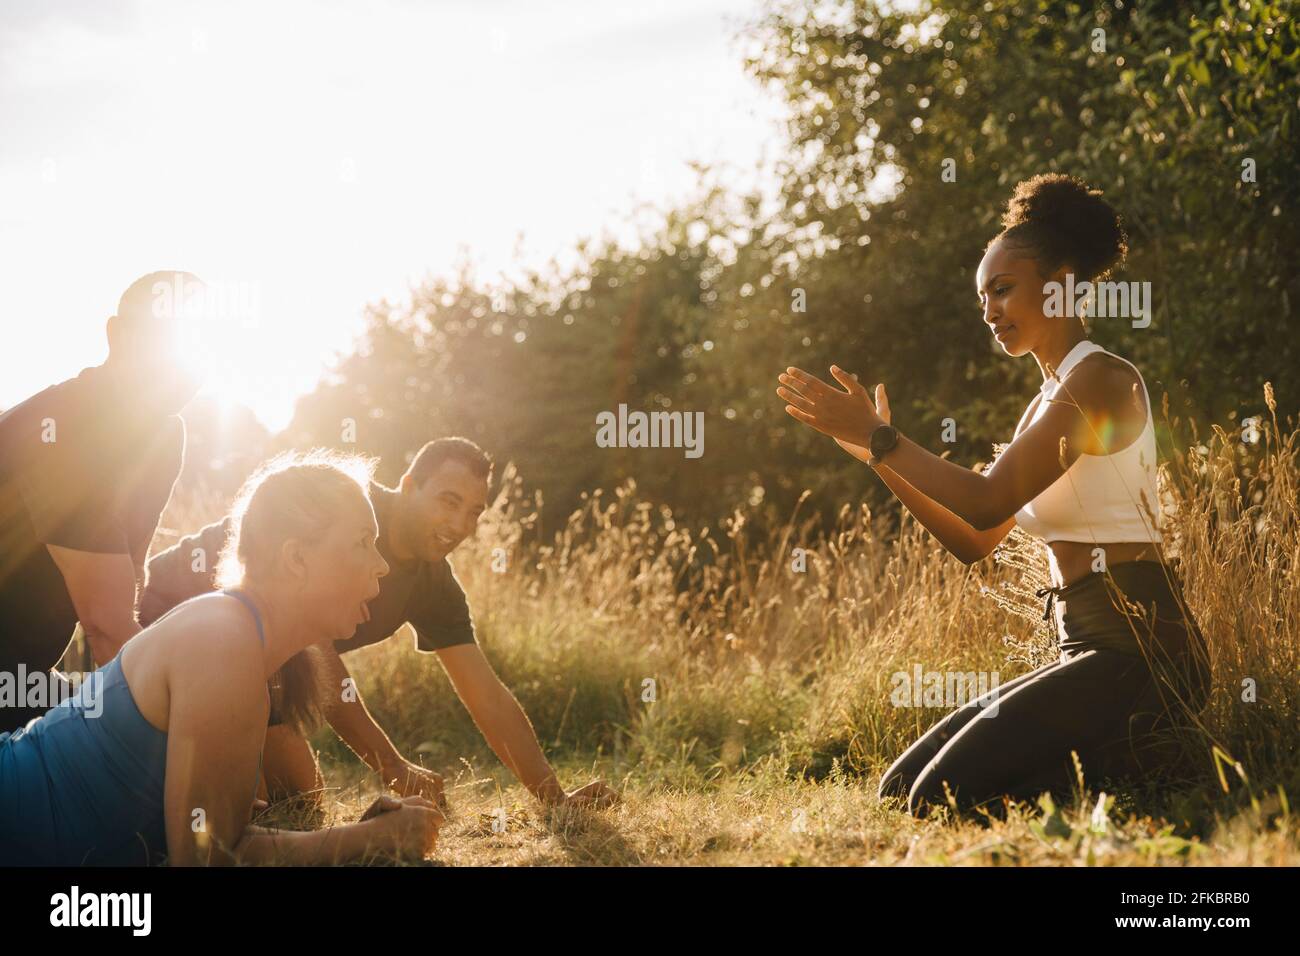 Male and female athletes exercising while fitness instructor cheering them in park Stock Photo